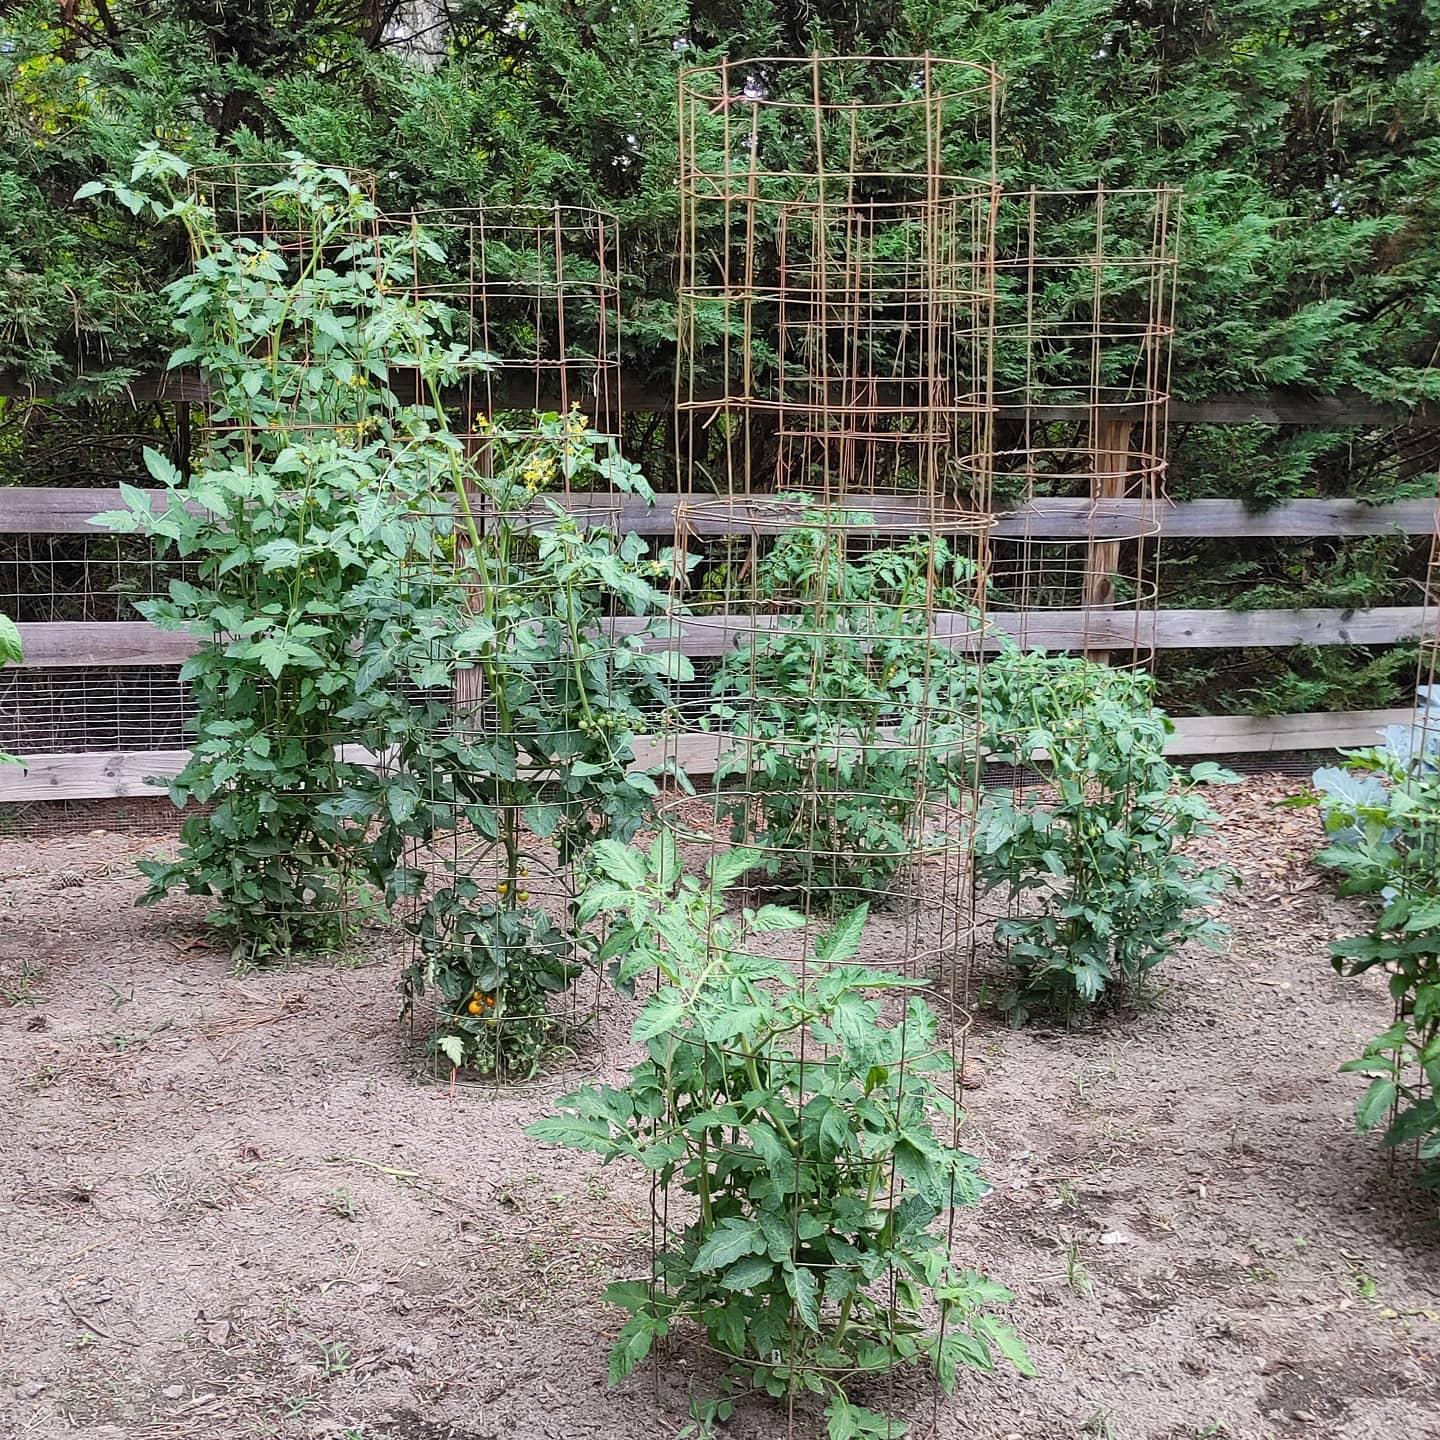 And there it is. The first tomato has reached the top of the 7 foot cage. It is only a matter of time before the forest fills in. Maybe this will be the year I actually prune them back. Probably not.